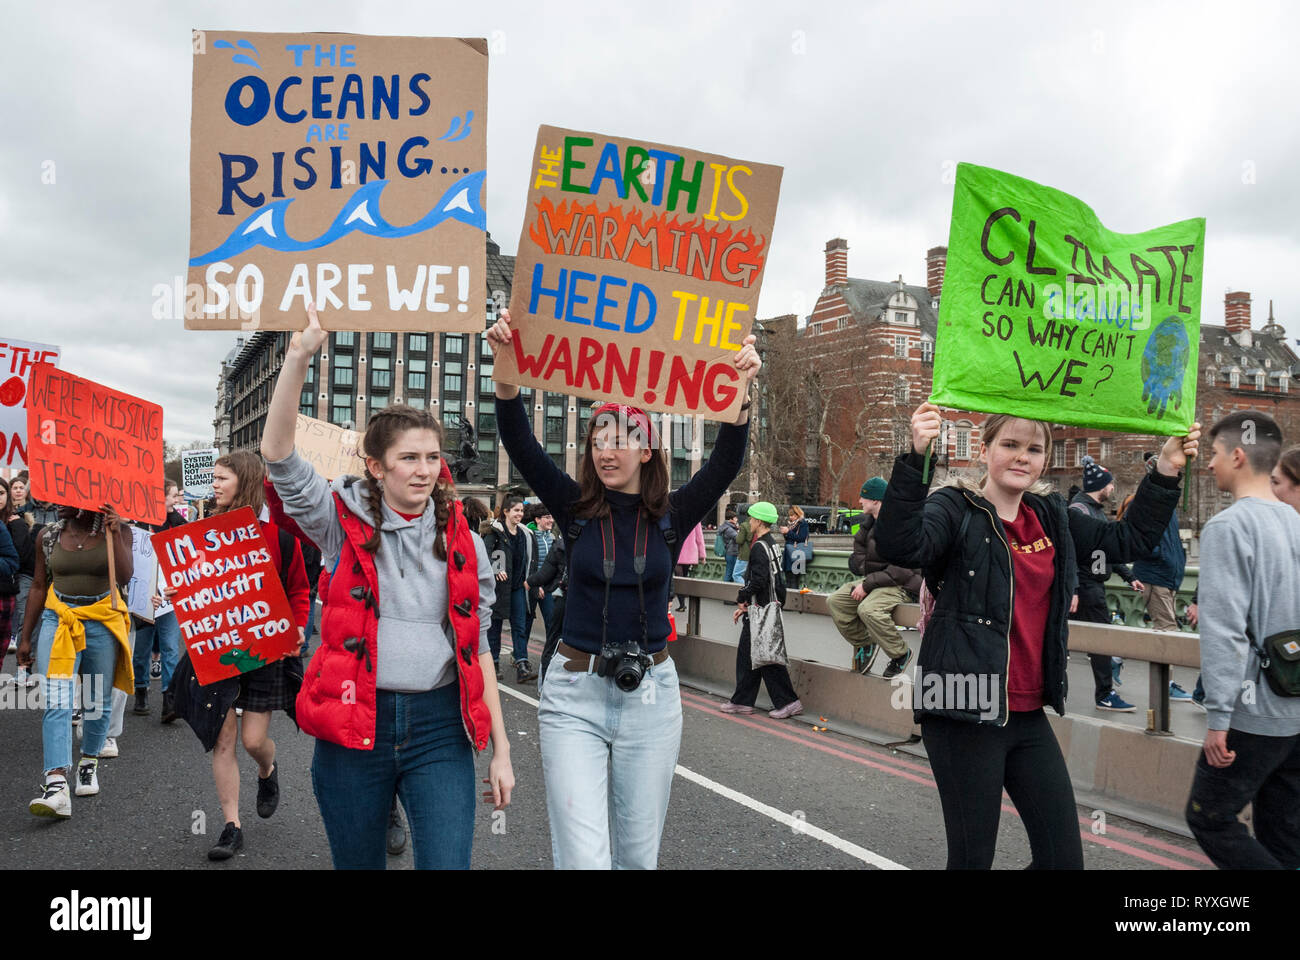 London, UK. 15th March, 2019. School students campaigning against climate change protest outside Parliament. Credit: Maggie sully/Alamy Live News. School children on strike to protest at climate change march over Westminster bridge, outside Parliament, London. In the foreground three young women students carry colourful homemade banners 'The oceans are rising...so are we!', 'The earth is warming, heed the warning' and 'Climate can change so why can't we?'. Part of the worldwide 'FridaysforFuture' protest. Stock Photo